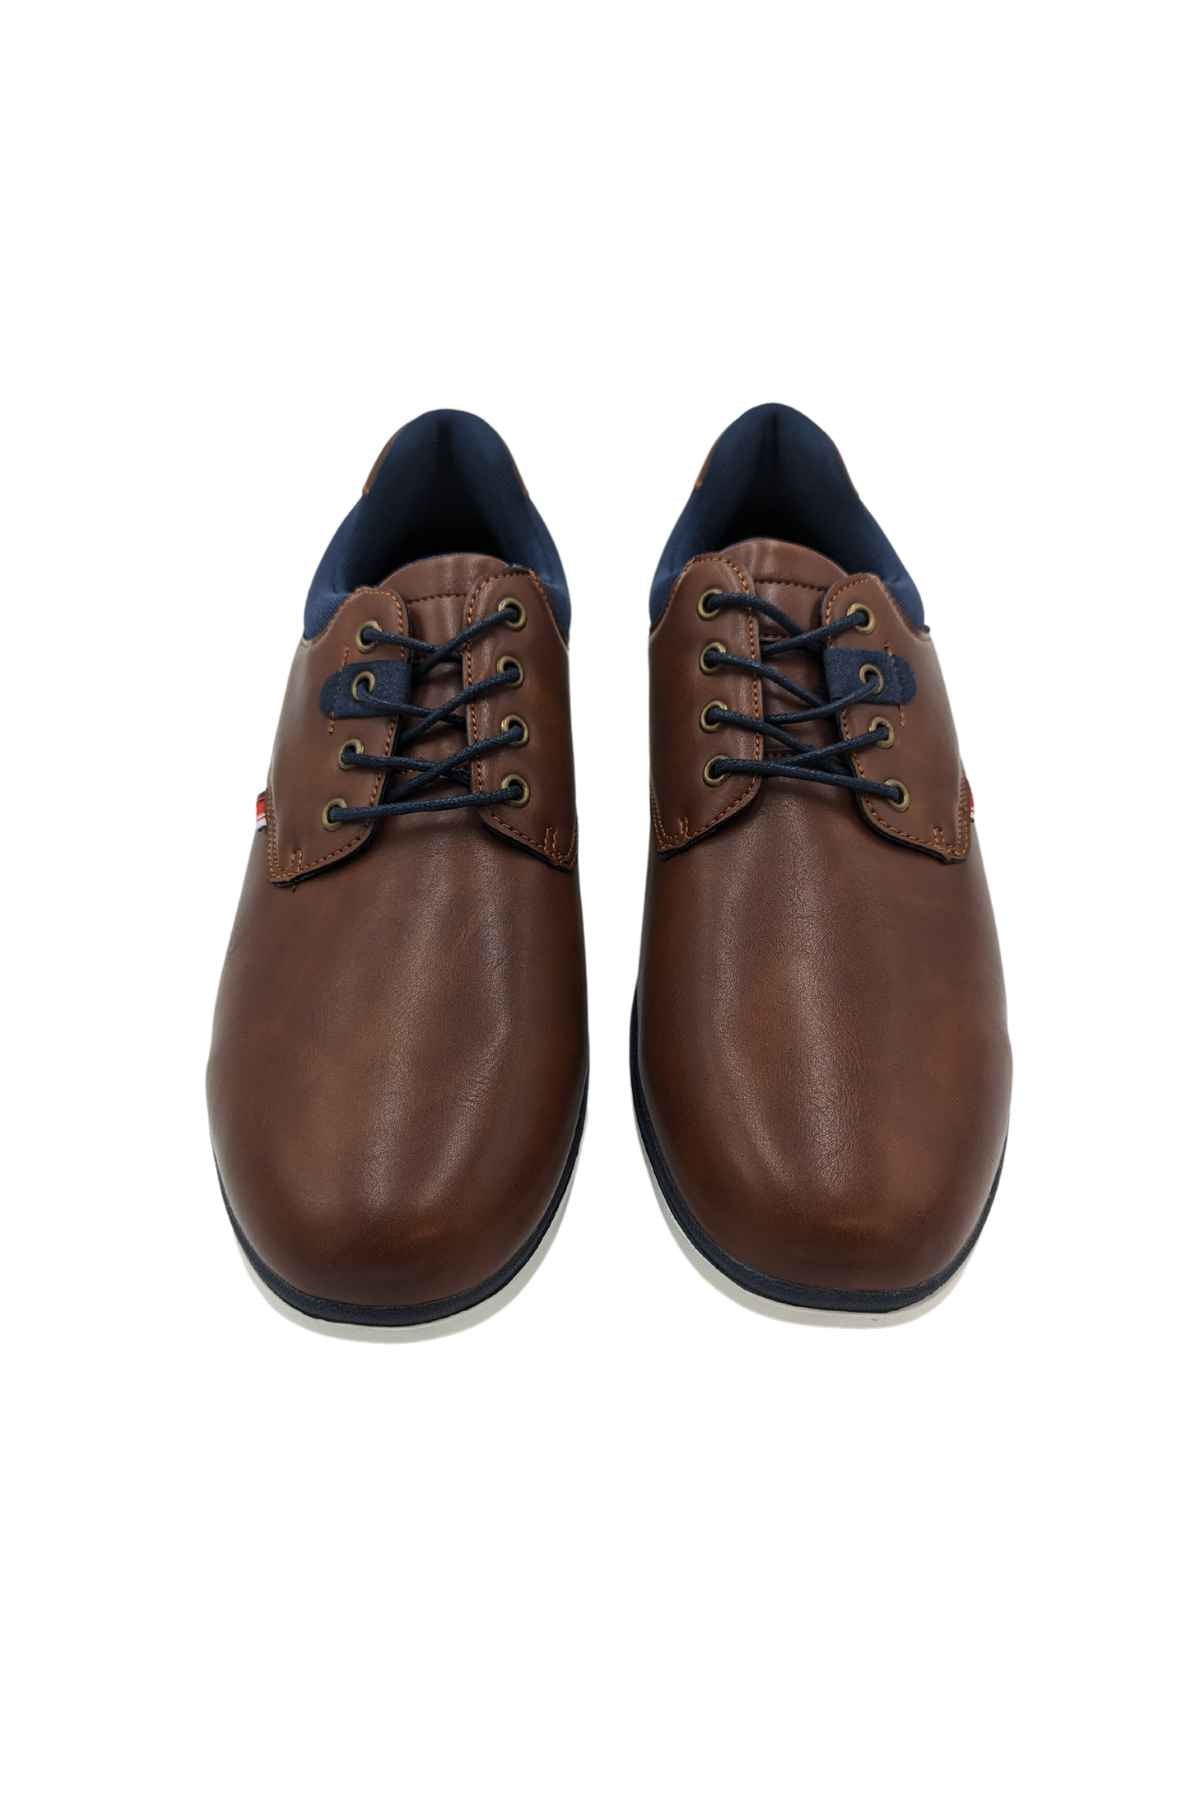 Dolphin Brown Lace Up Shoe-Front view